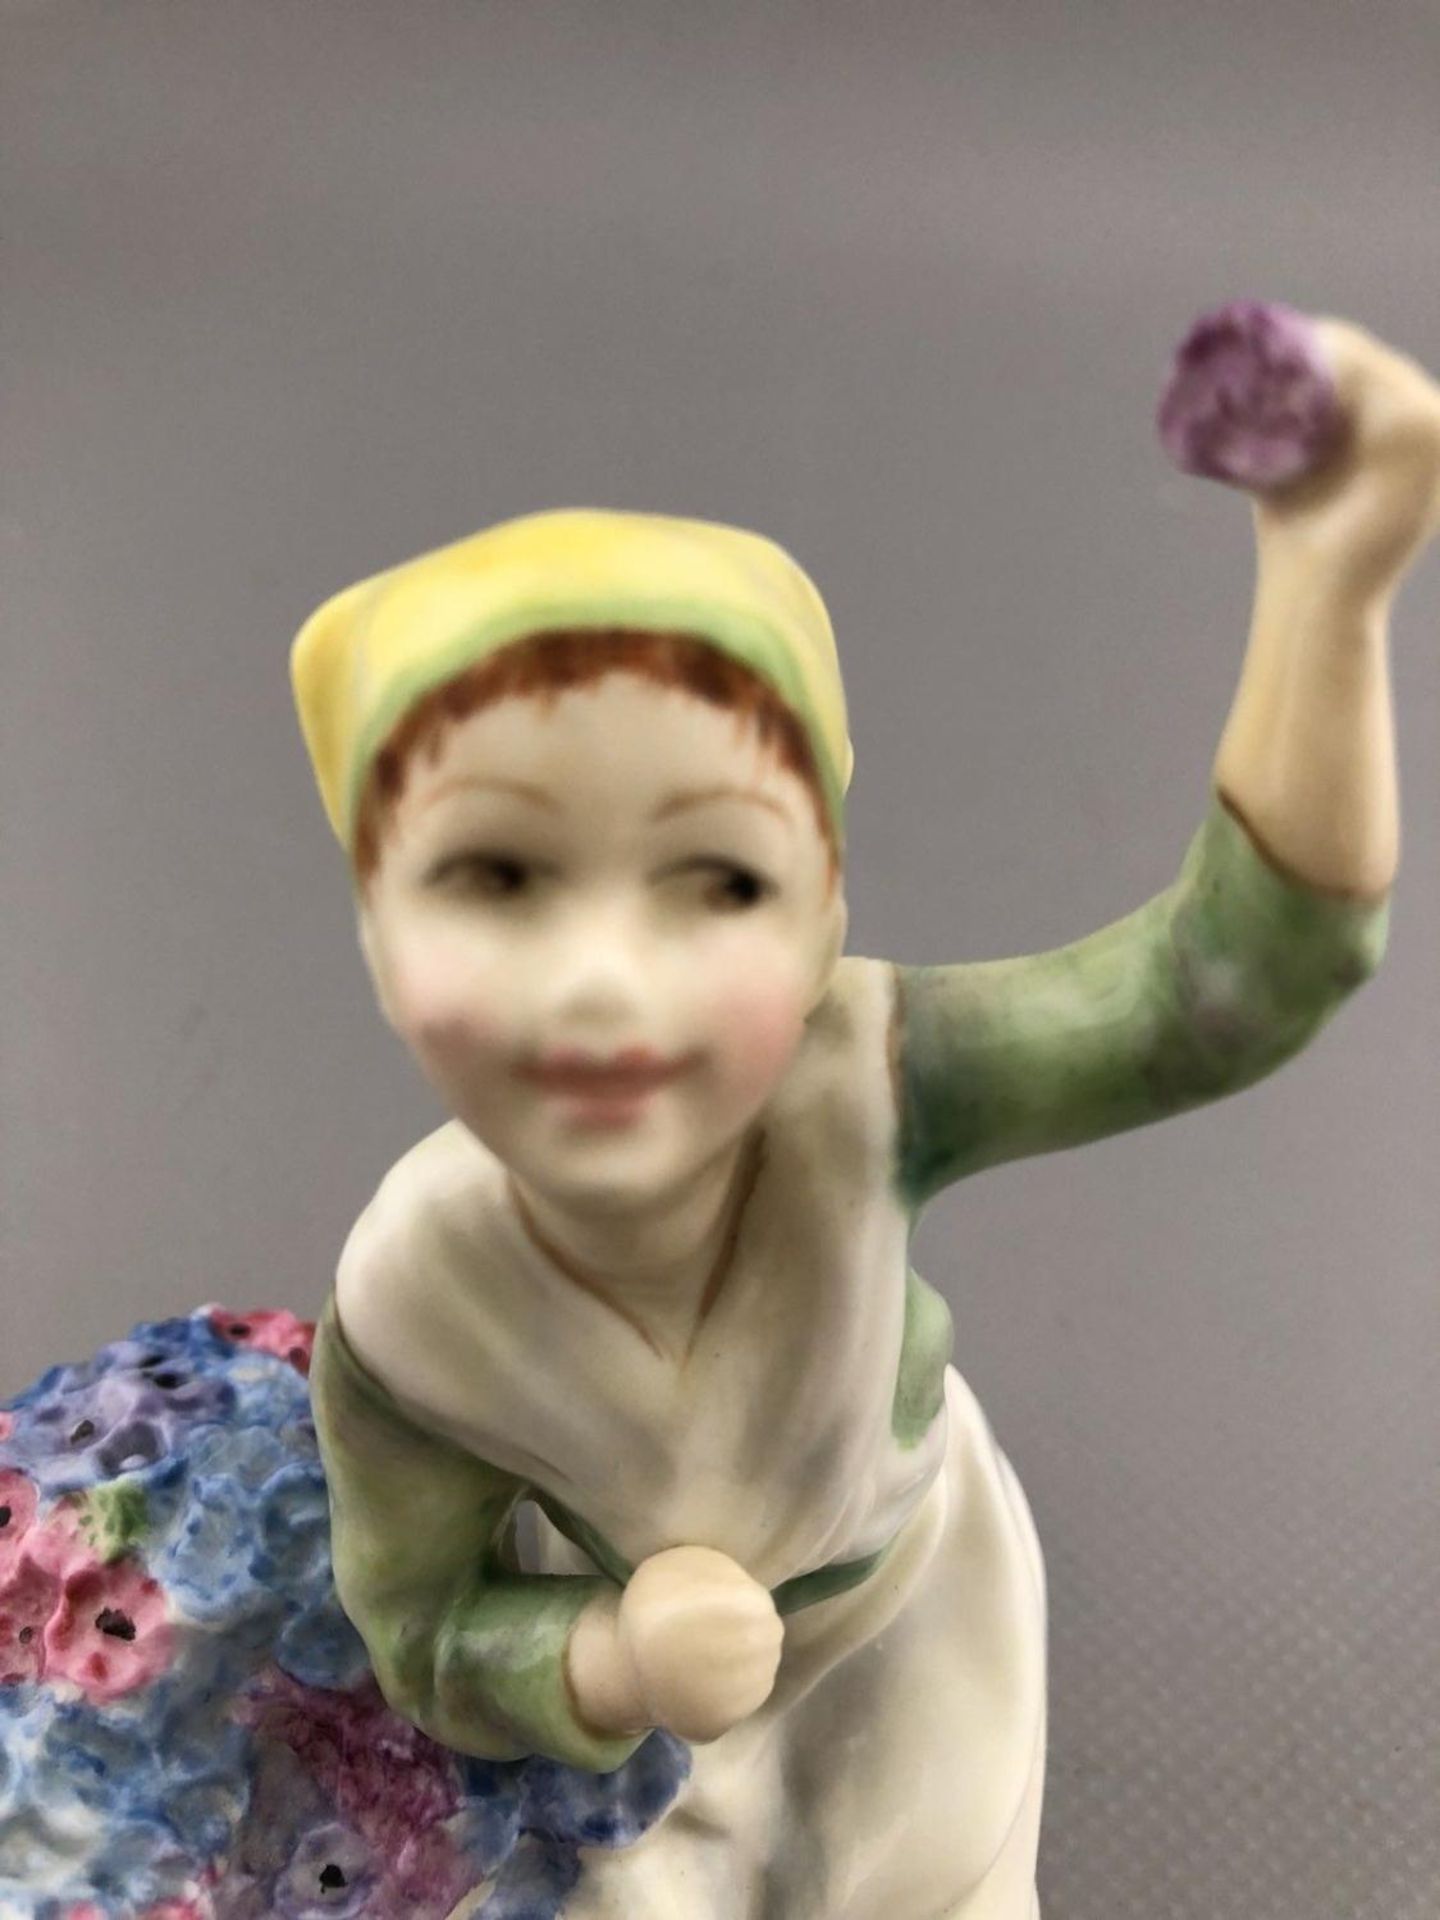 Royal Worcester Porcelain Children of the Nations Figurine ITALY 3067 - Image 2 of 6